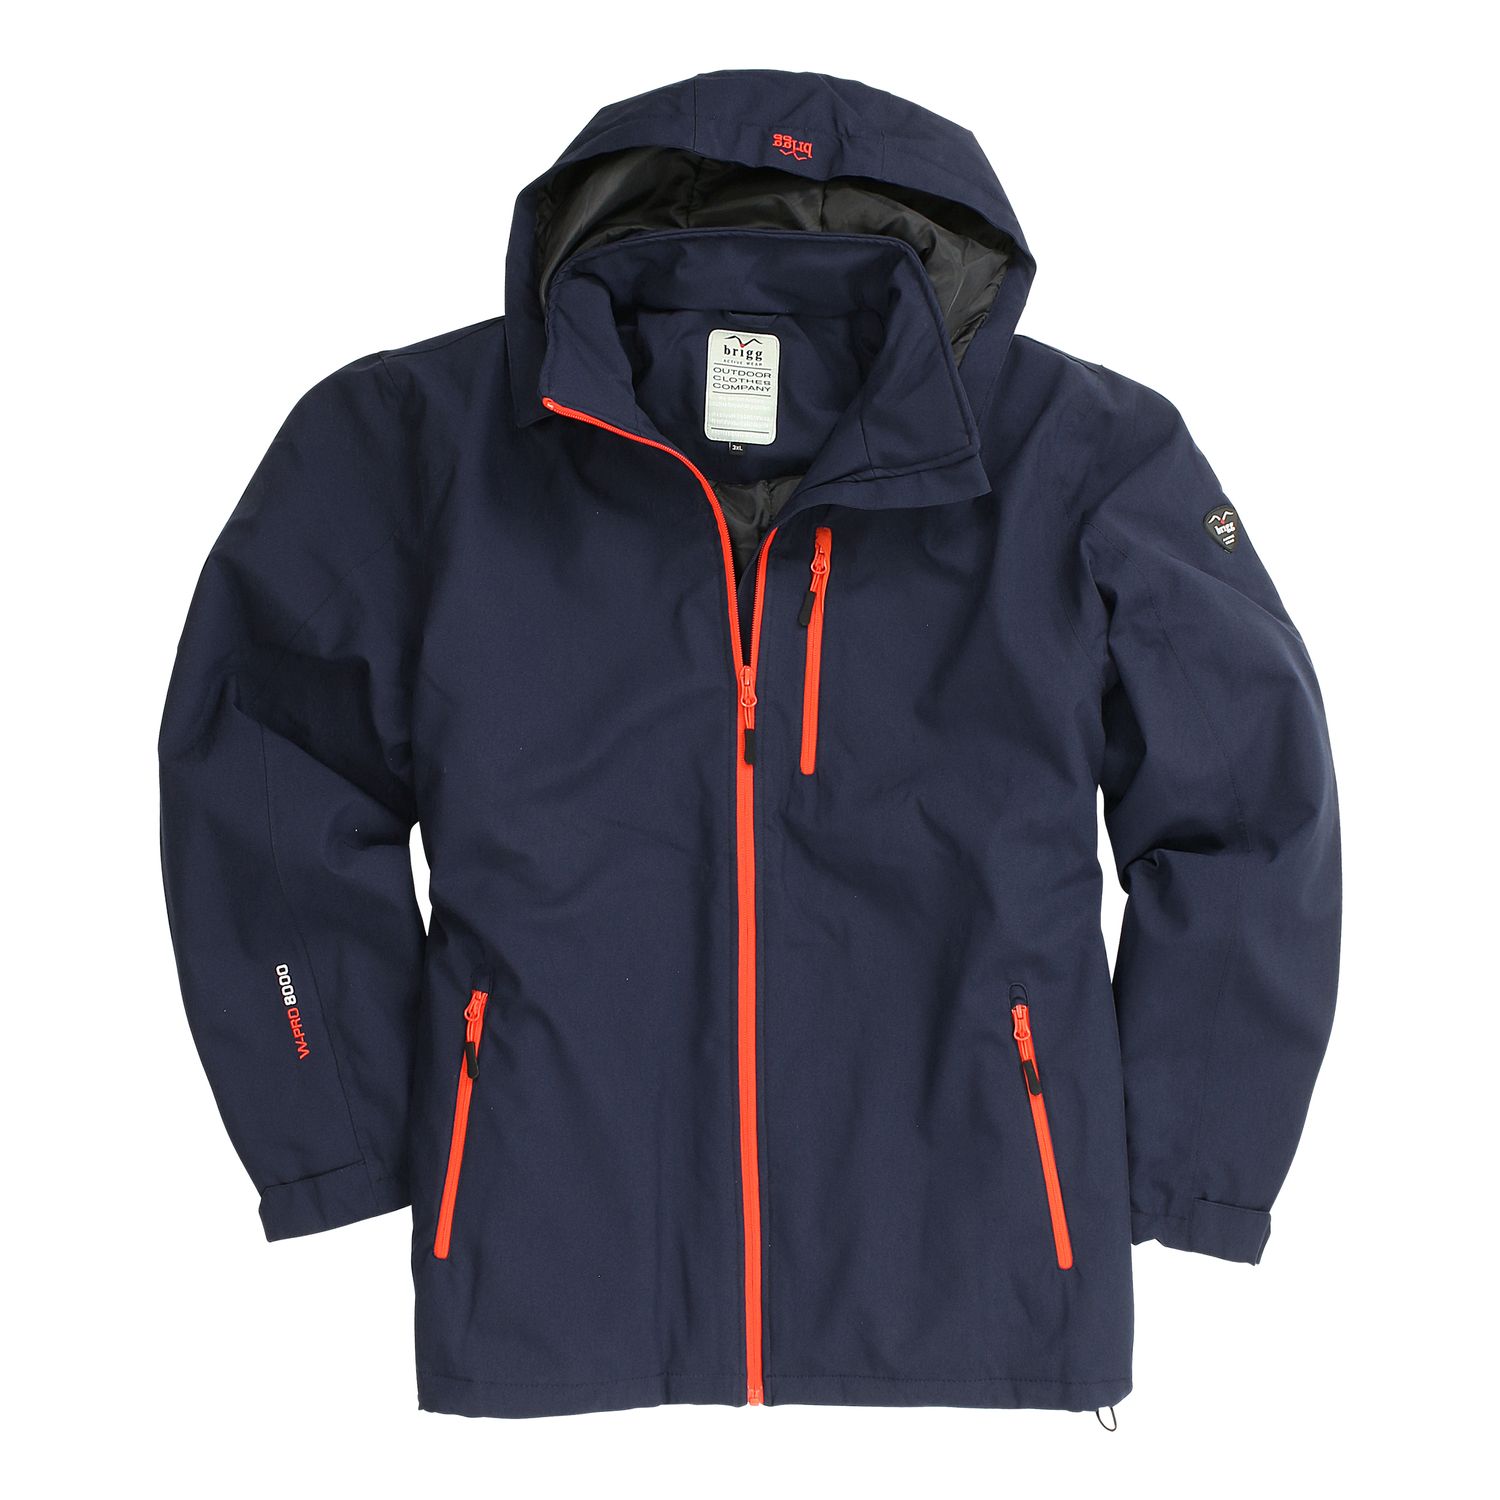 Lined softshell jacket in dark blue by Brigg in oversizes up to 10XL